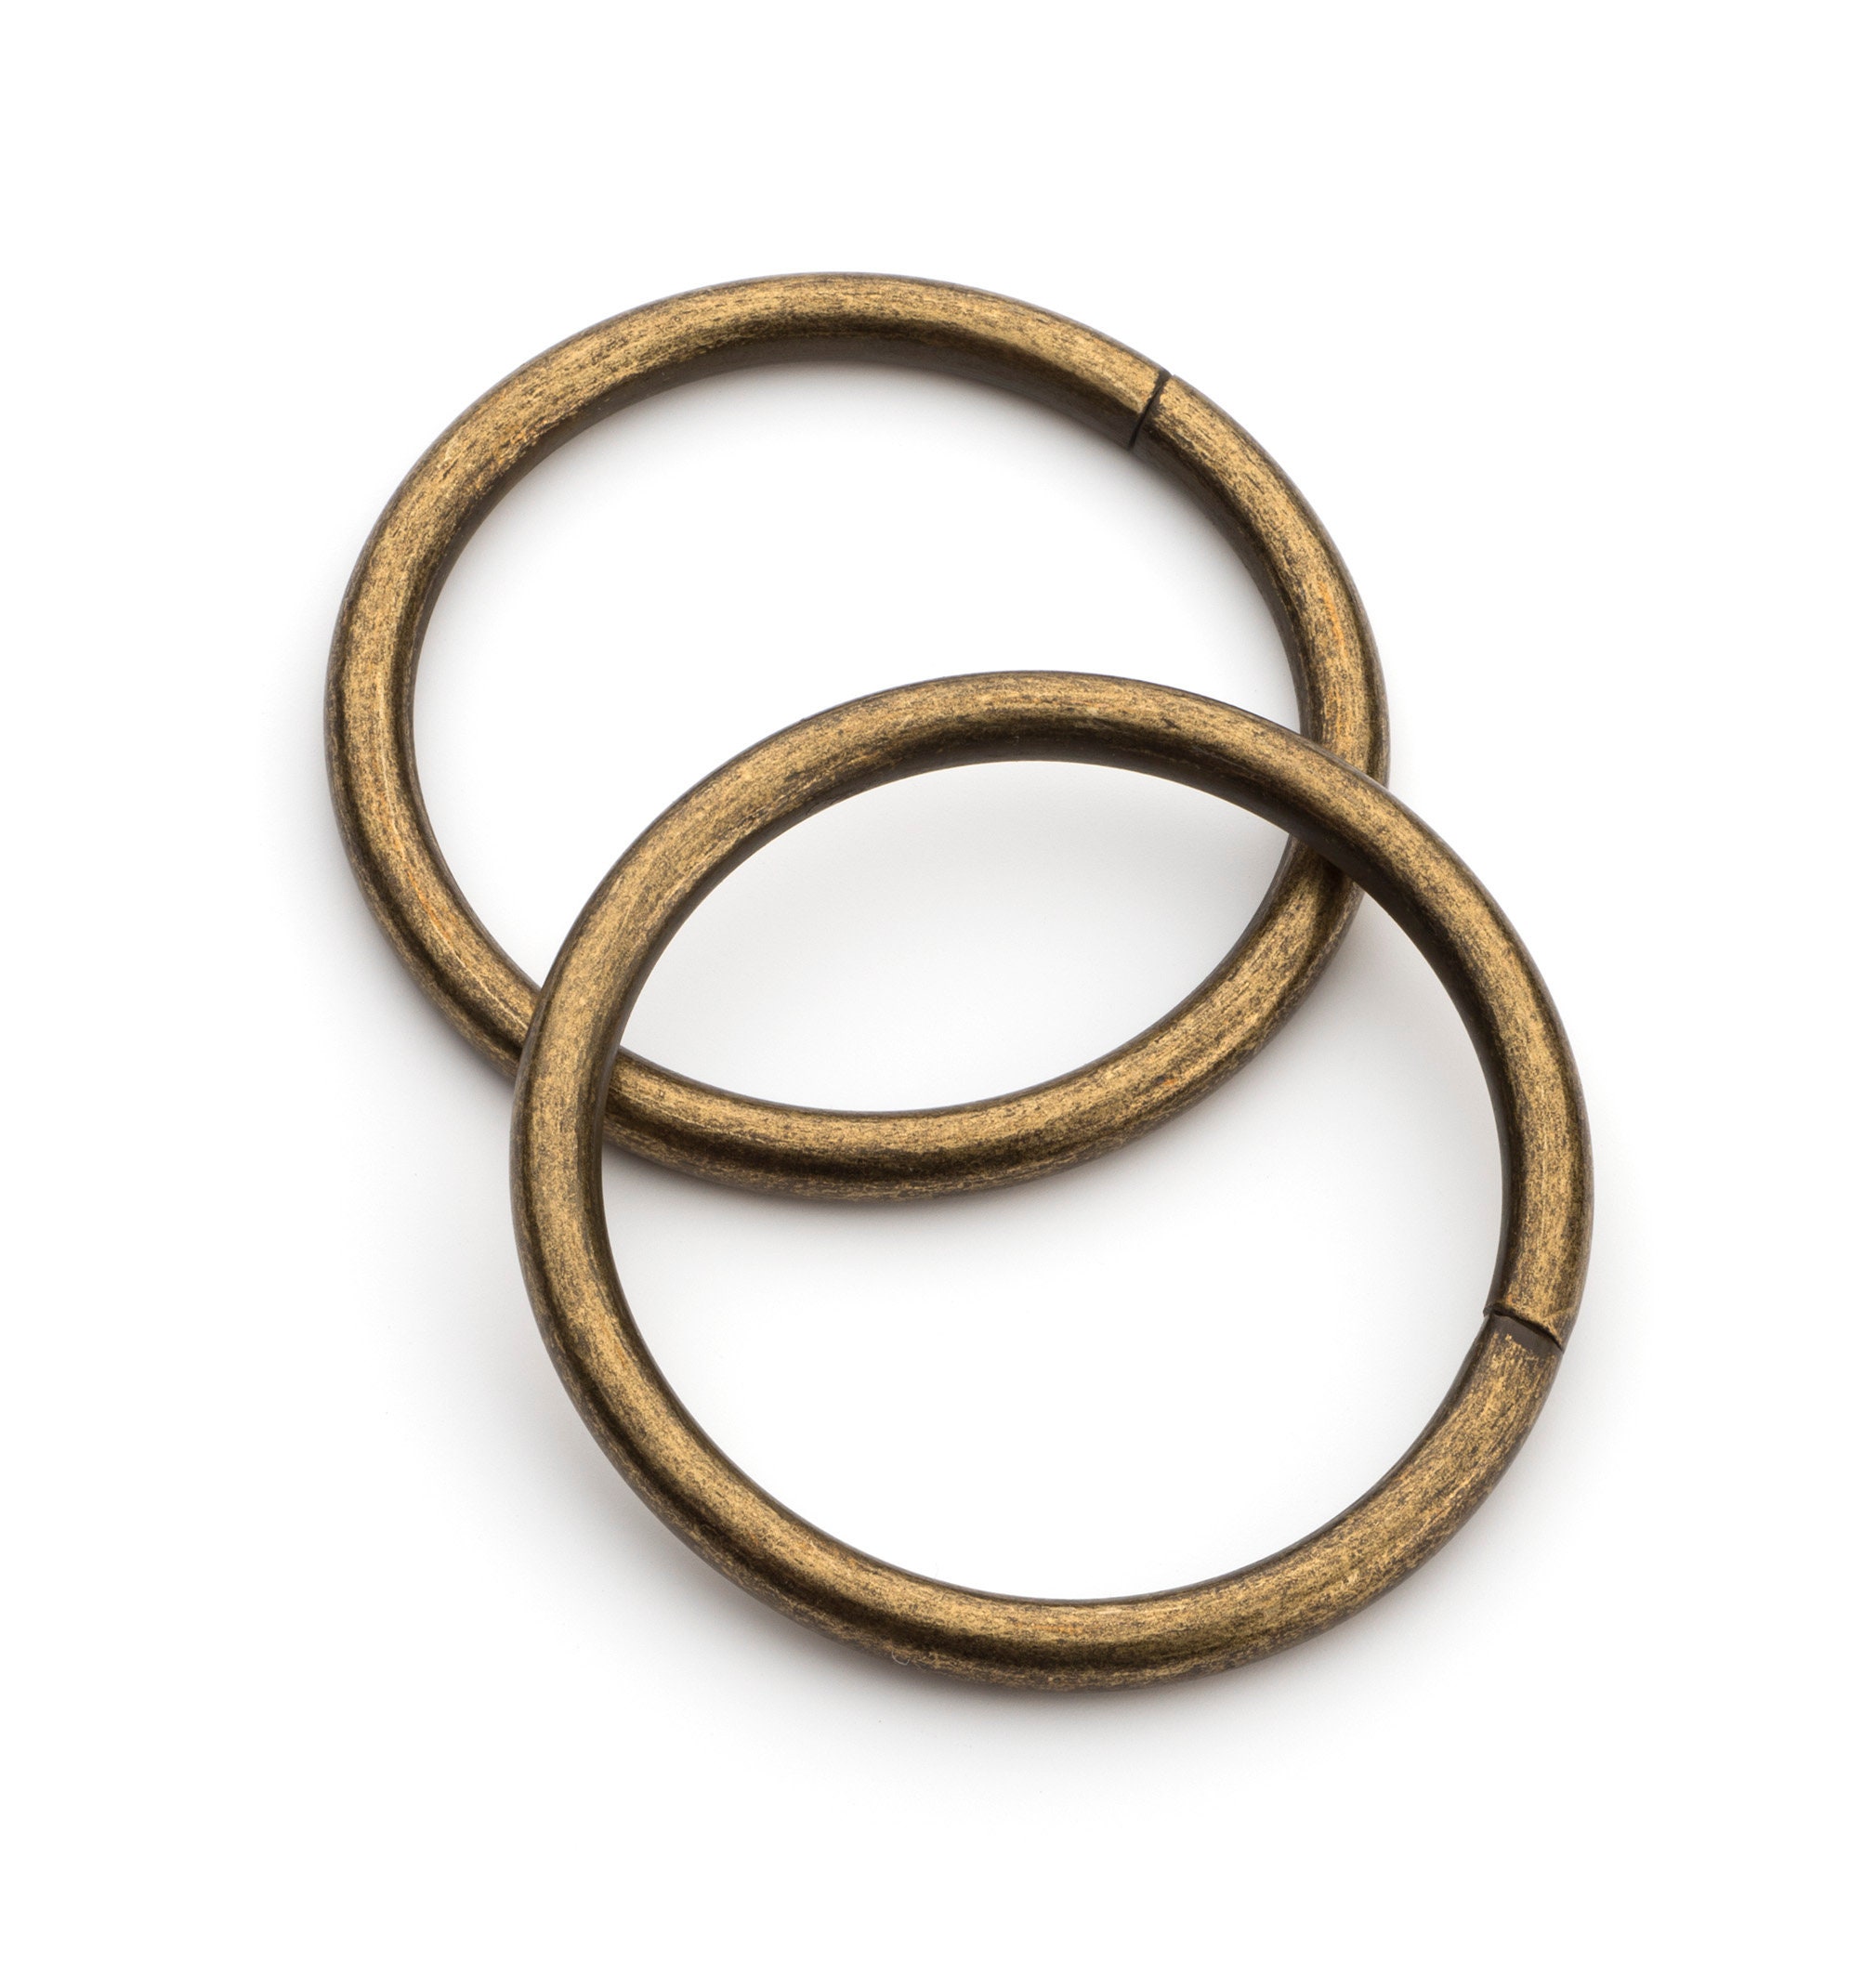 Metal O Ring C-style : 150253 Flat Shape Multiple Sizes & Colors 